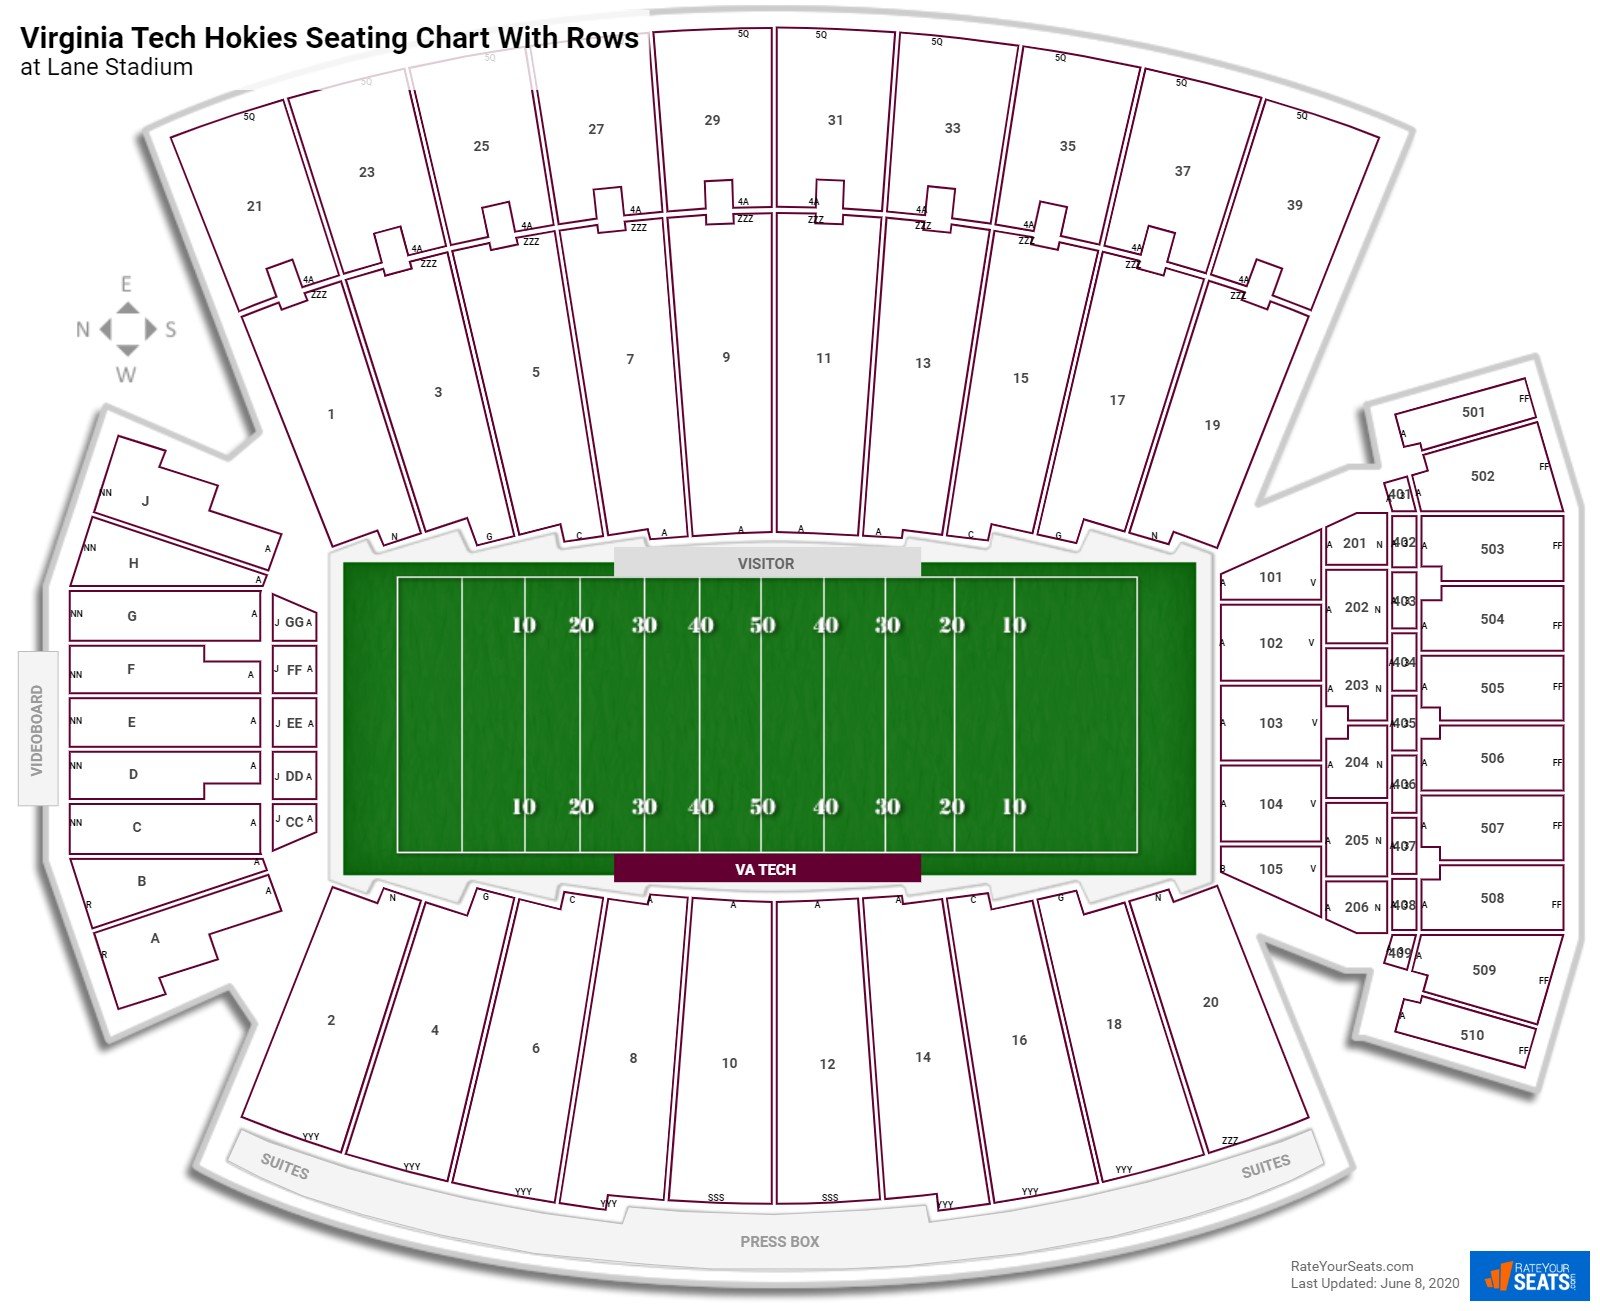 Lane Stadium seating chart with row numbers